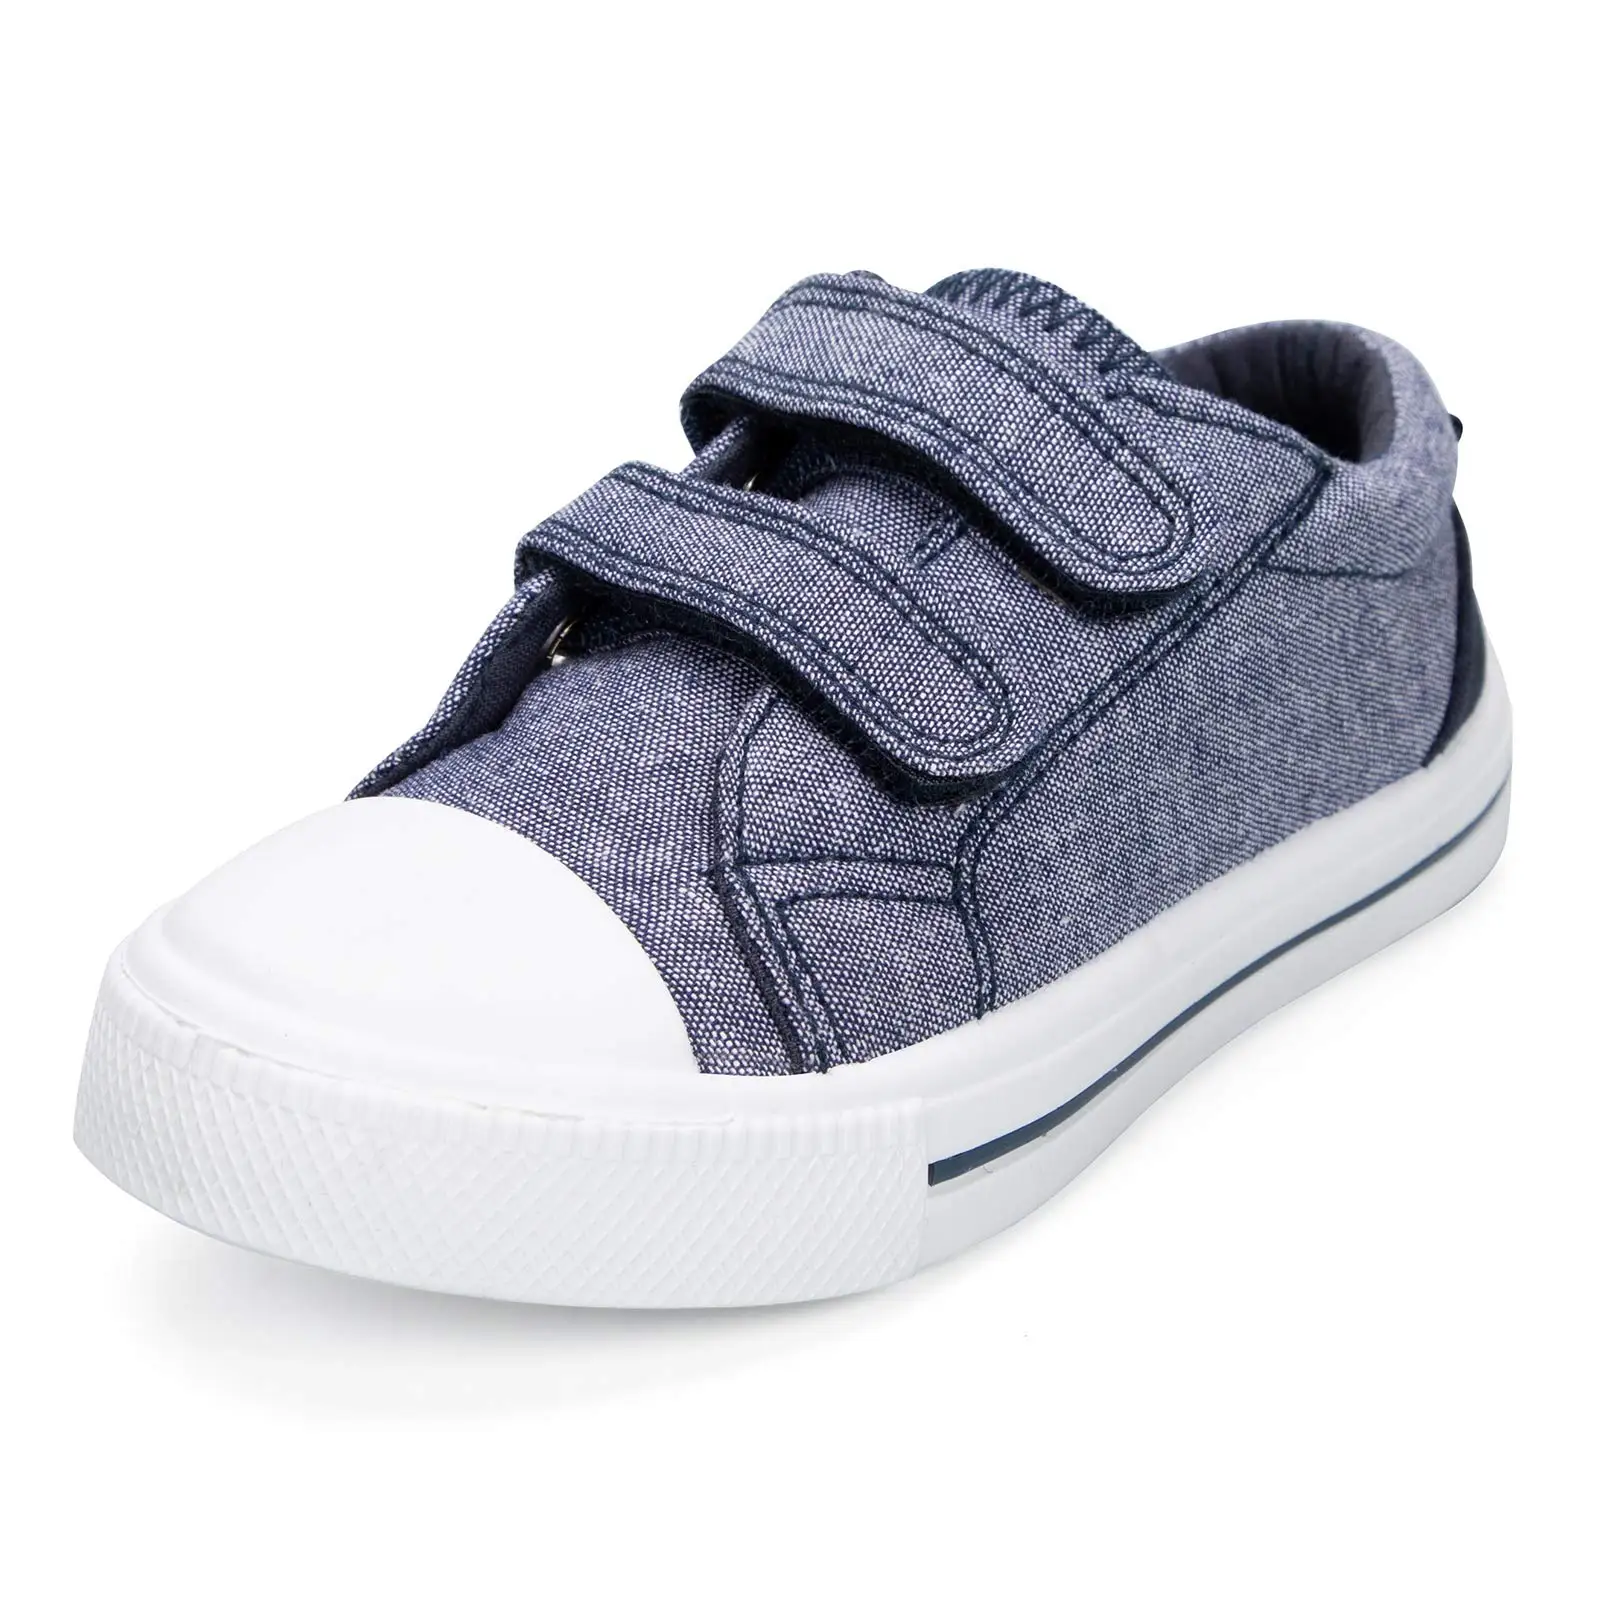 Wholesale Fashion High Quality Toddler Boys Girls Shoes Toddler Sneakers